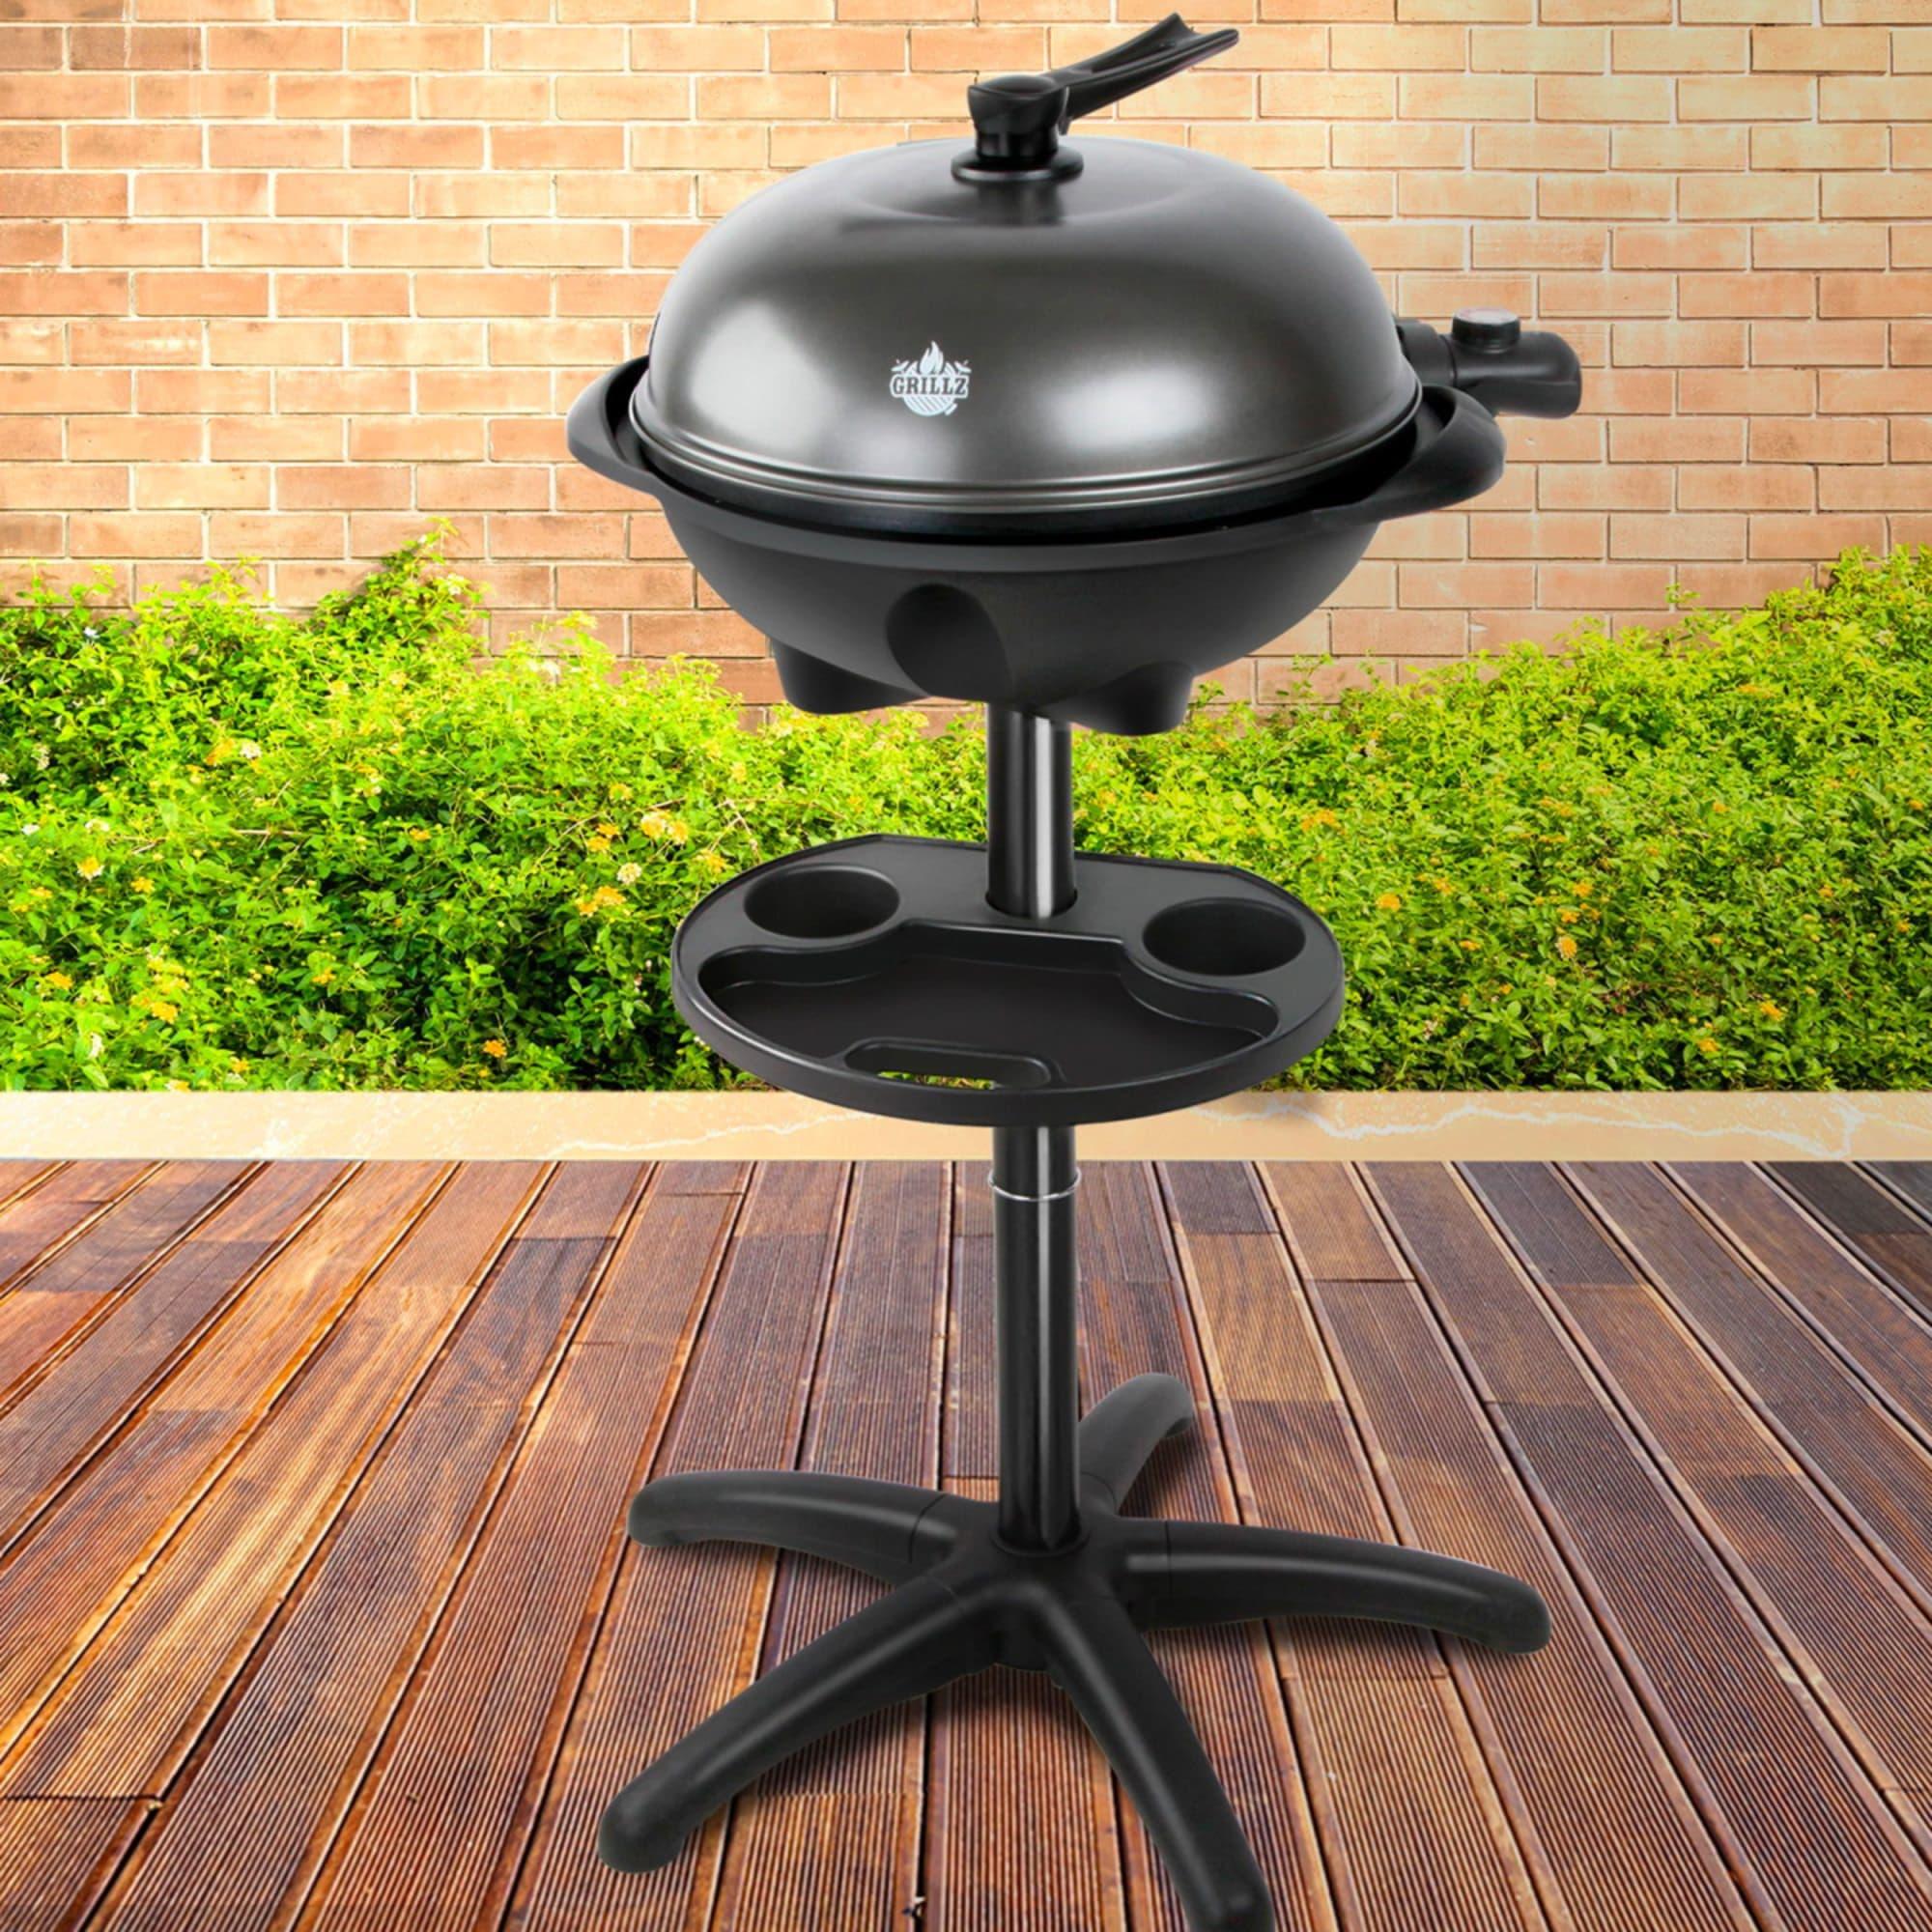 Grillz Portable Electric Barbecue Grill with Stand Image 2